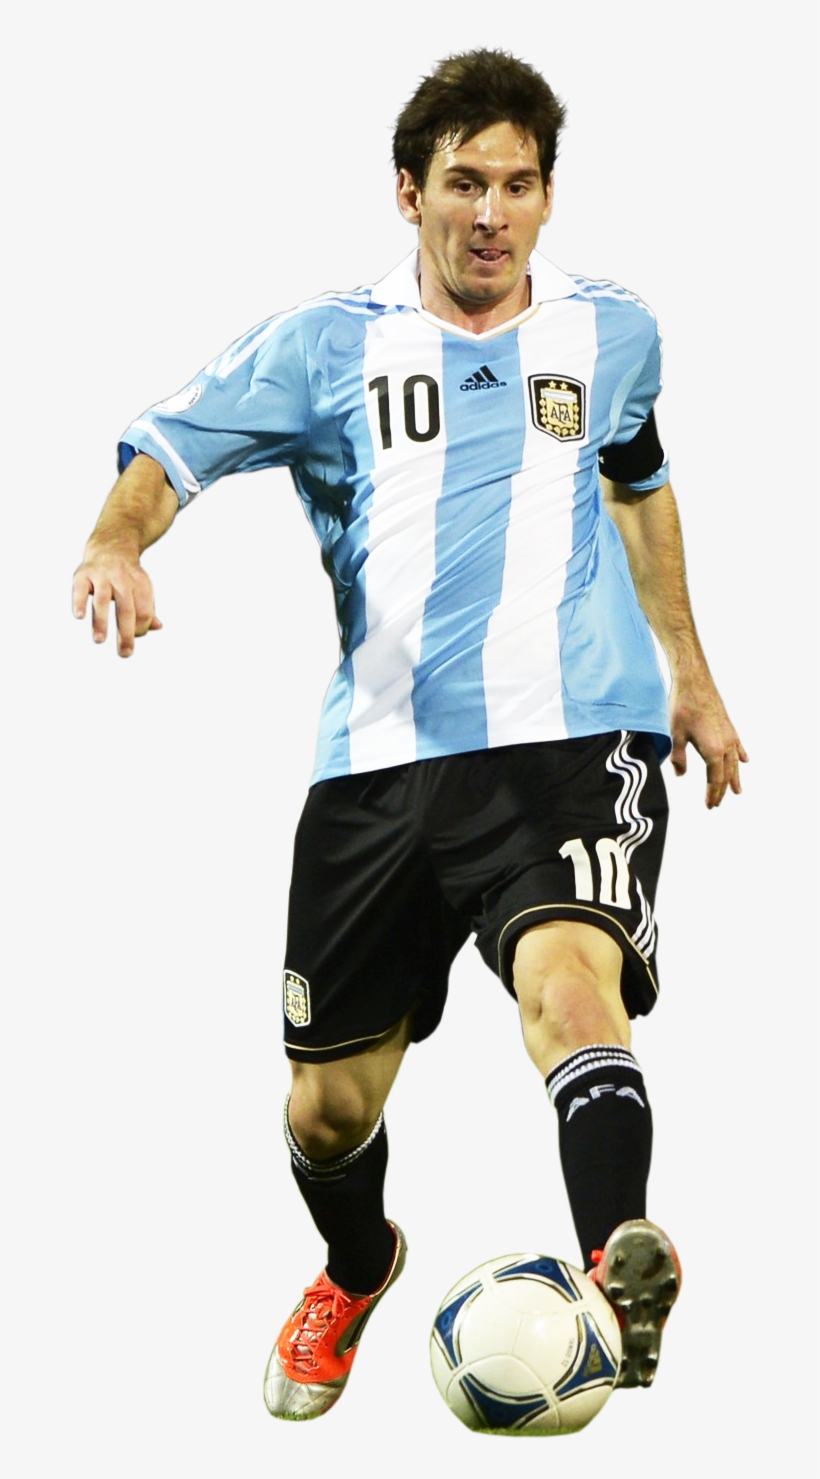 Lionel Messi Png File - Lionel Messi Birthday Wishes, transparent png #129956